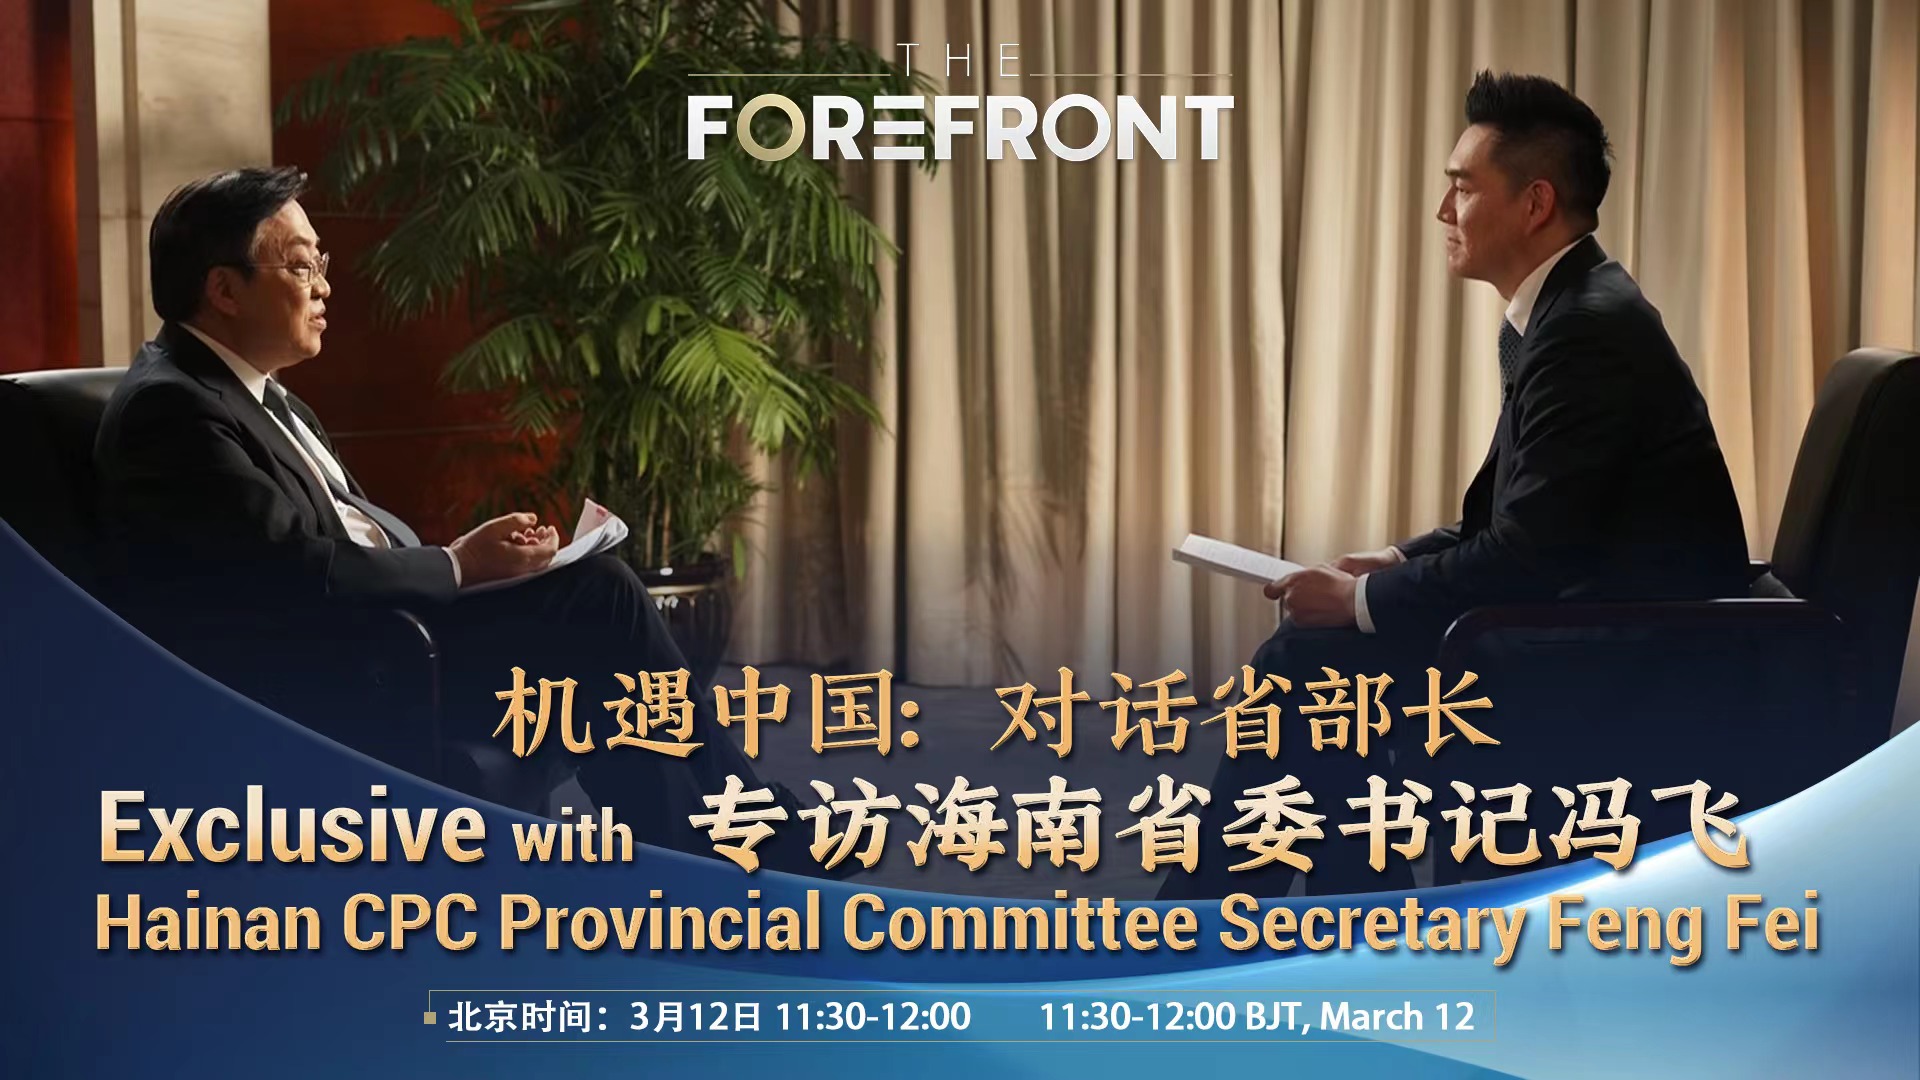 Watch: Exclusive with Hainan CPC Provincial Committee Secretary